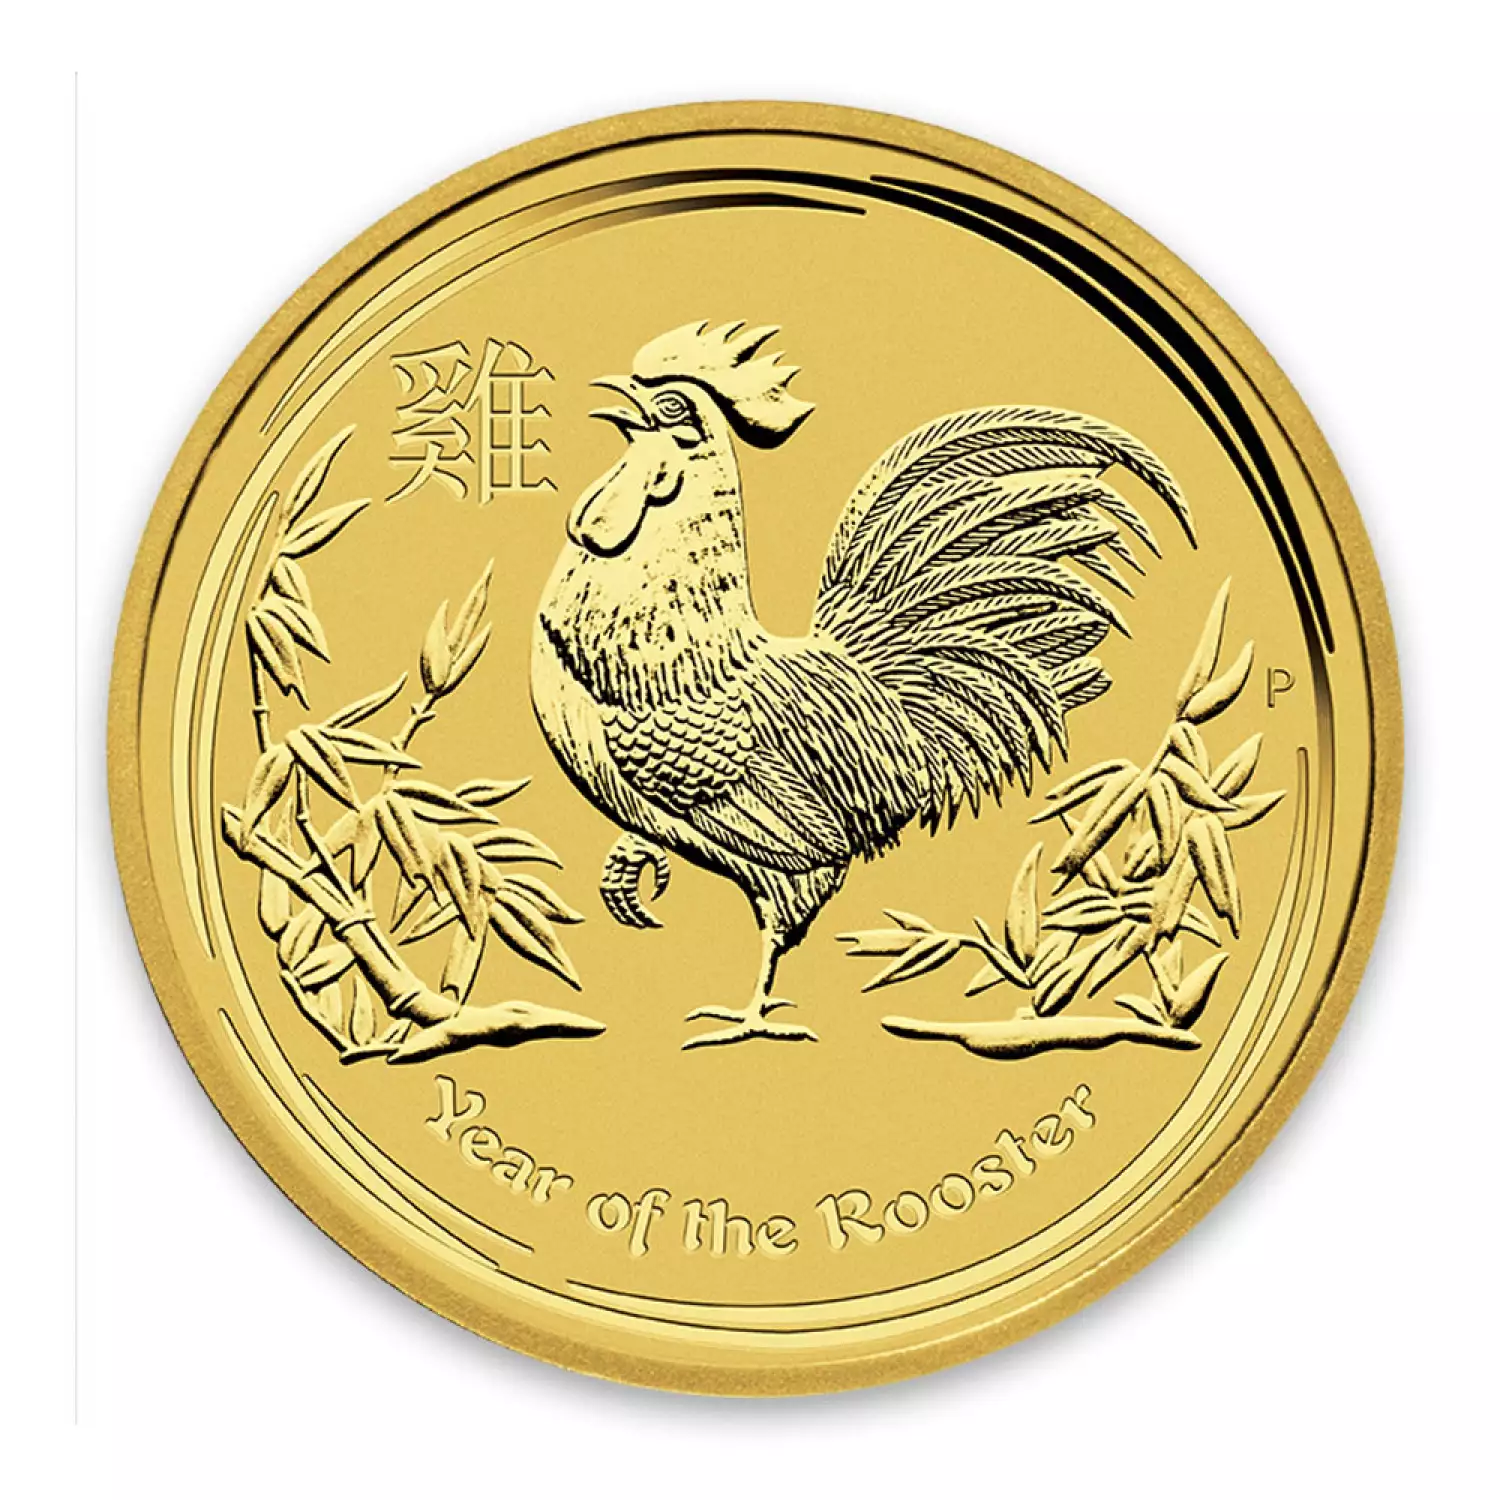 2017 2 oz Australian Perth Mint Gold Lunar II: Year of the Rooster (3)